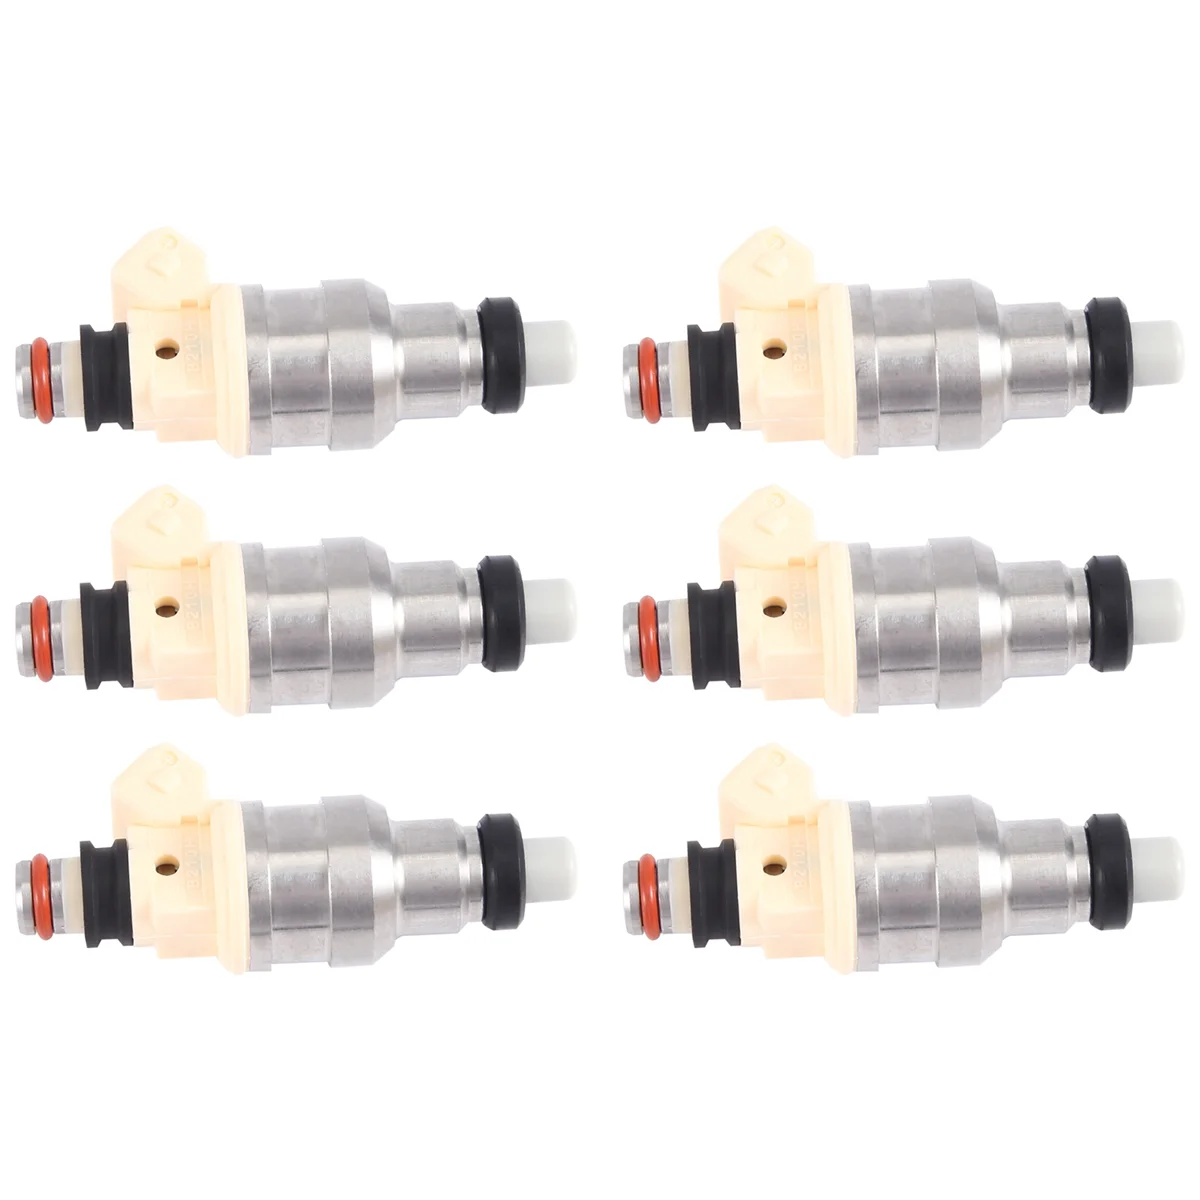 

6X INP-051, MD111421, MD141263 Fuel Injector for Mitsubishi Eclipse / Galant / Mighty Max / Mirage /Montero/Sigma 3.0 V6